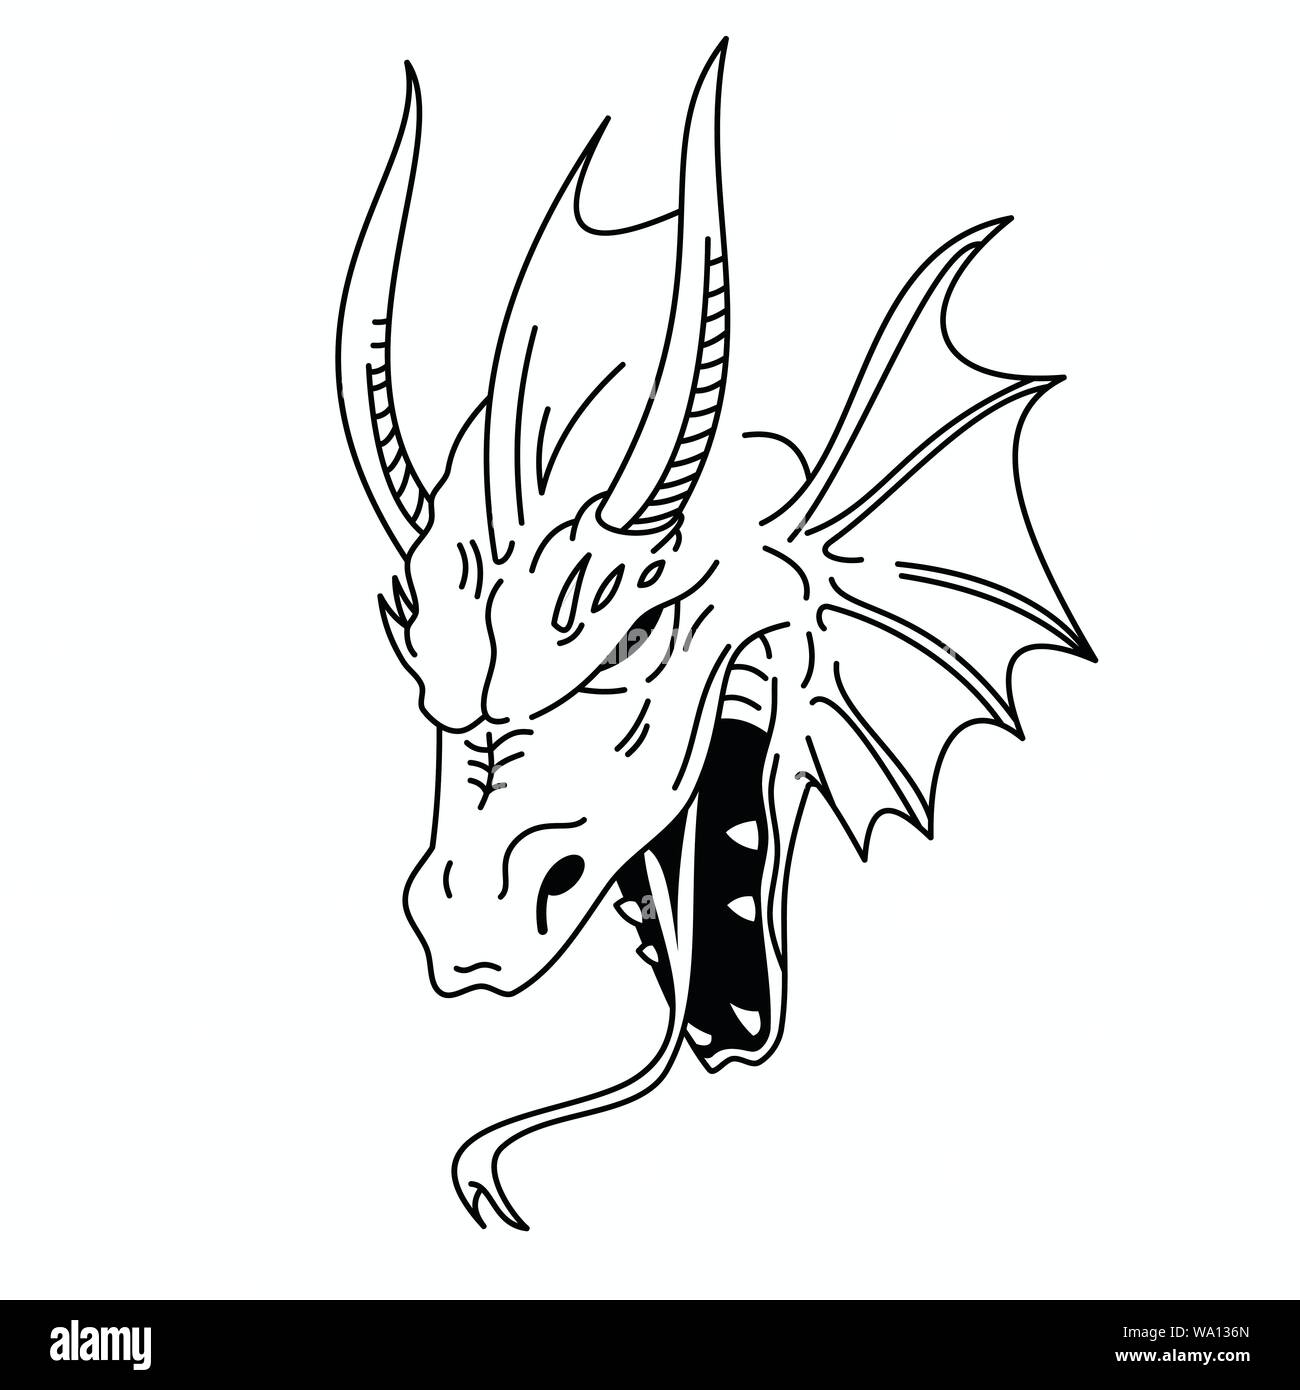 Share more than 79 dragon stencil tattoo best - in.cdgdbentre